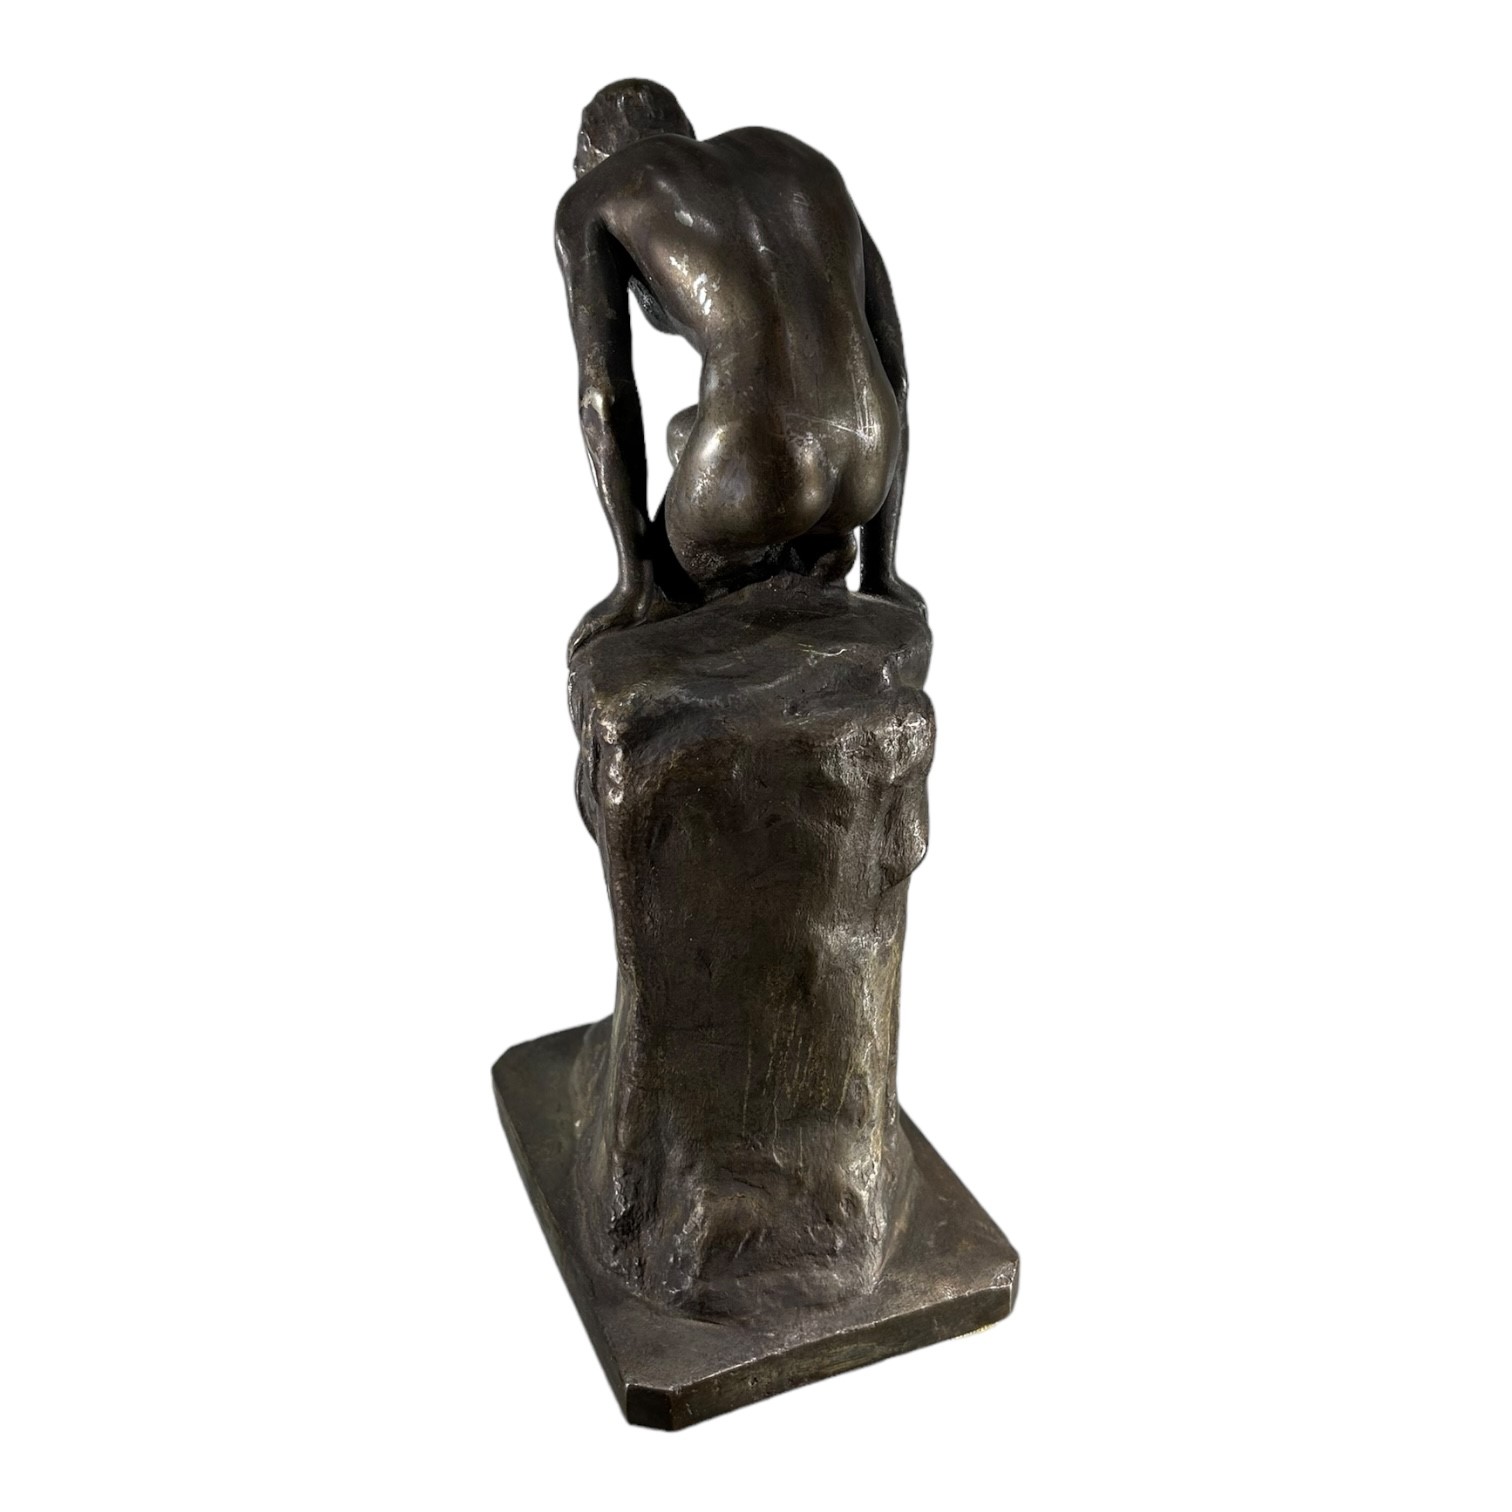 A 20TH CENTURY BRONZE FIGURE OF A NUDE FEMALE BATHER Modelled on stylised plinth with frog and - Image 3 of 3